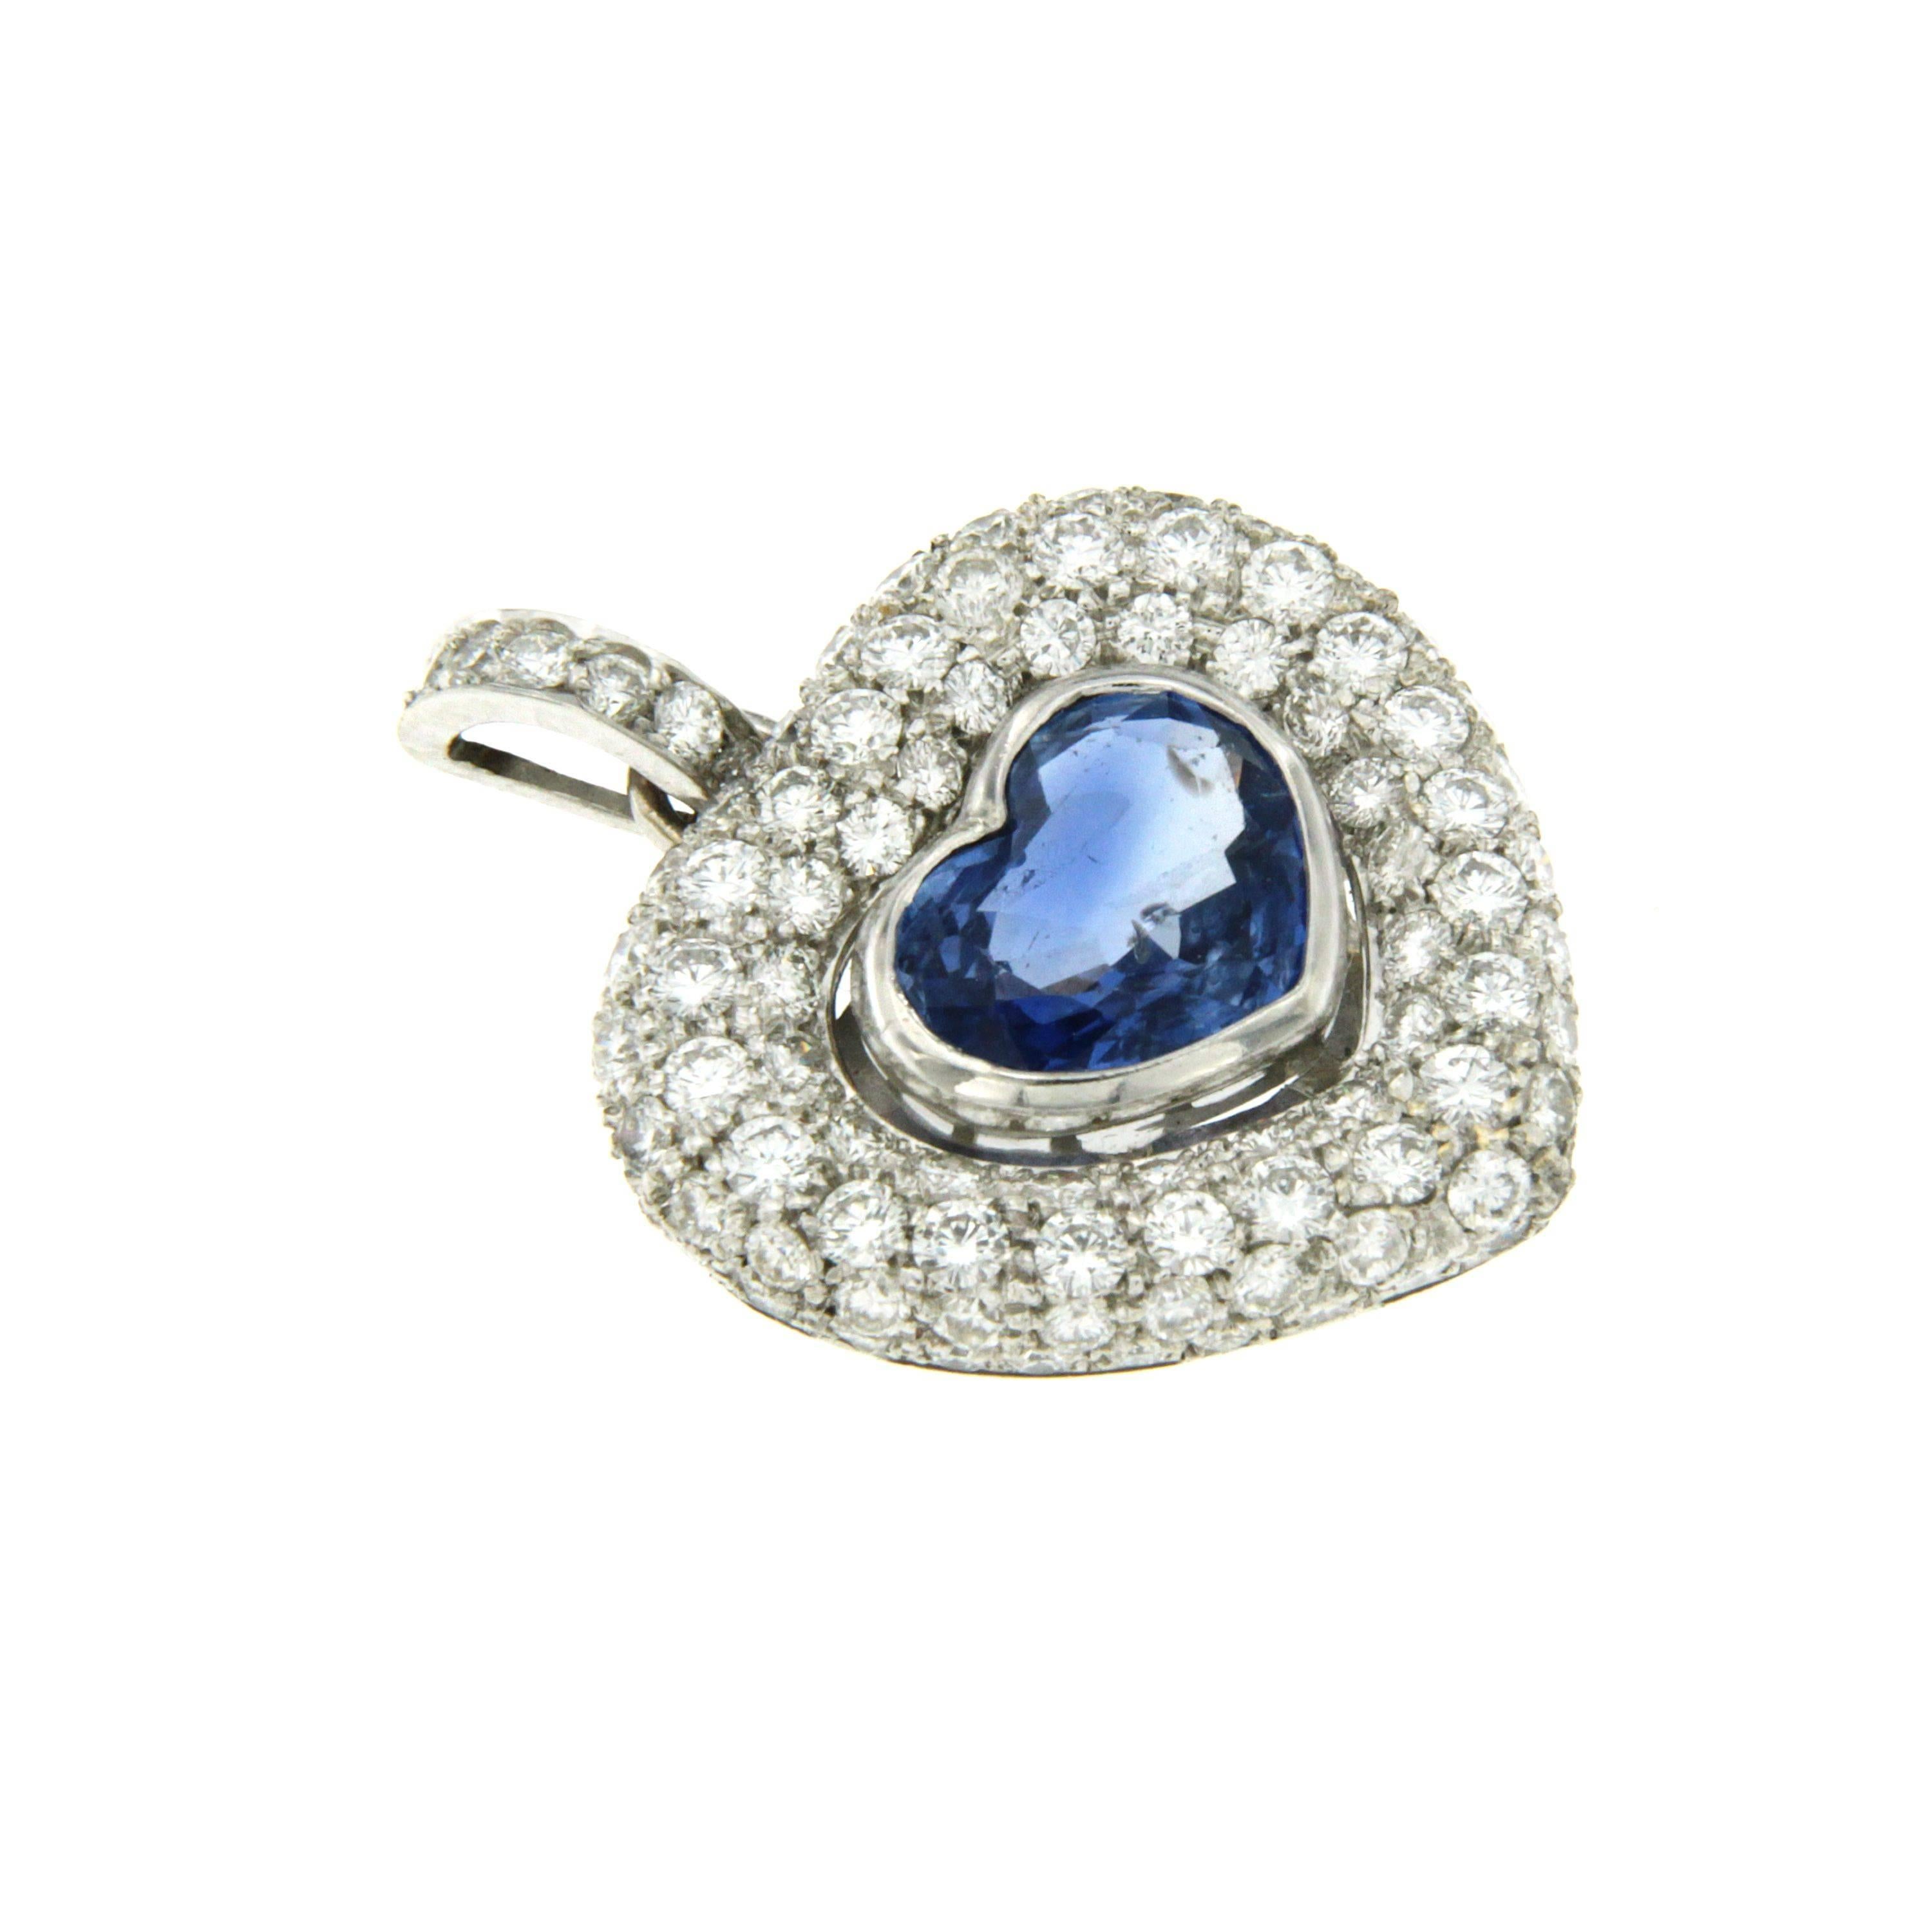 Fabulous heart cut natural ceylon Sapphire of great color and clarity weighing 3.00 carat, set in a Stunning diamond heart shape pendant, pavé set with sparkling round brilliant cut diamonds weighing tot. 2.80 carat graded G color Vvs1 , mounted in